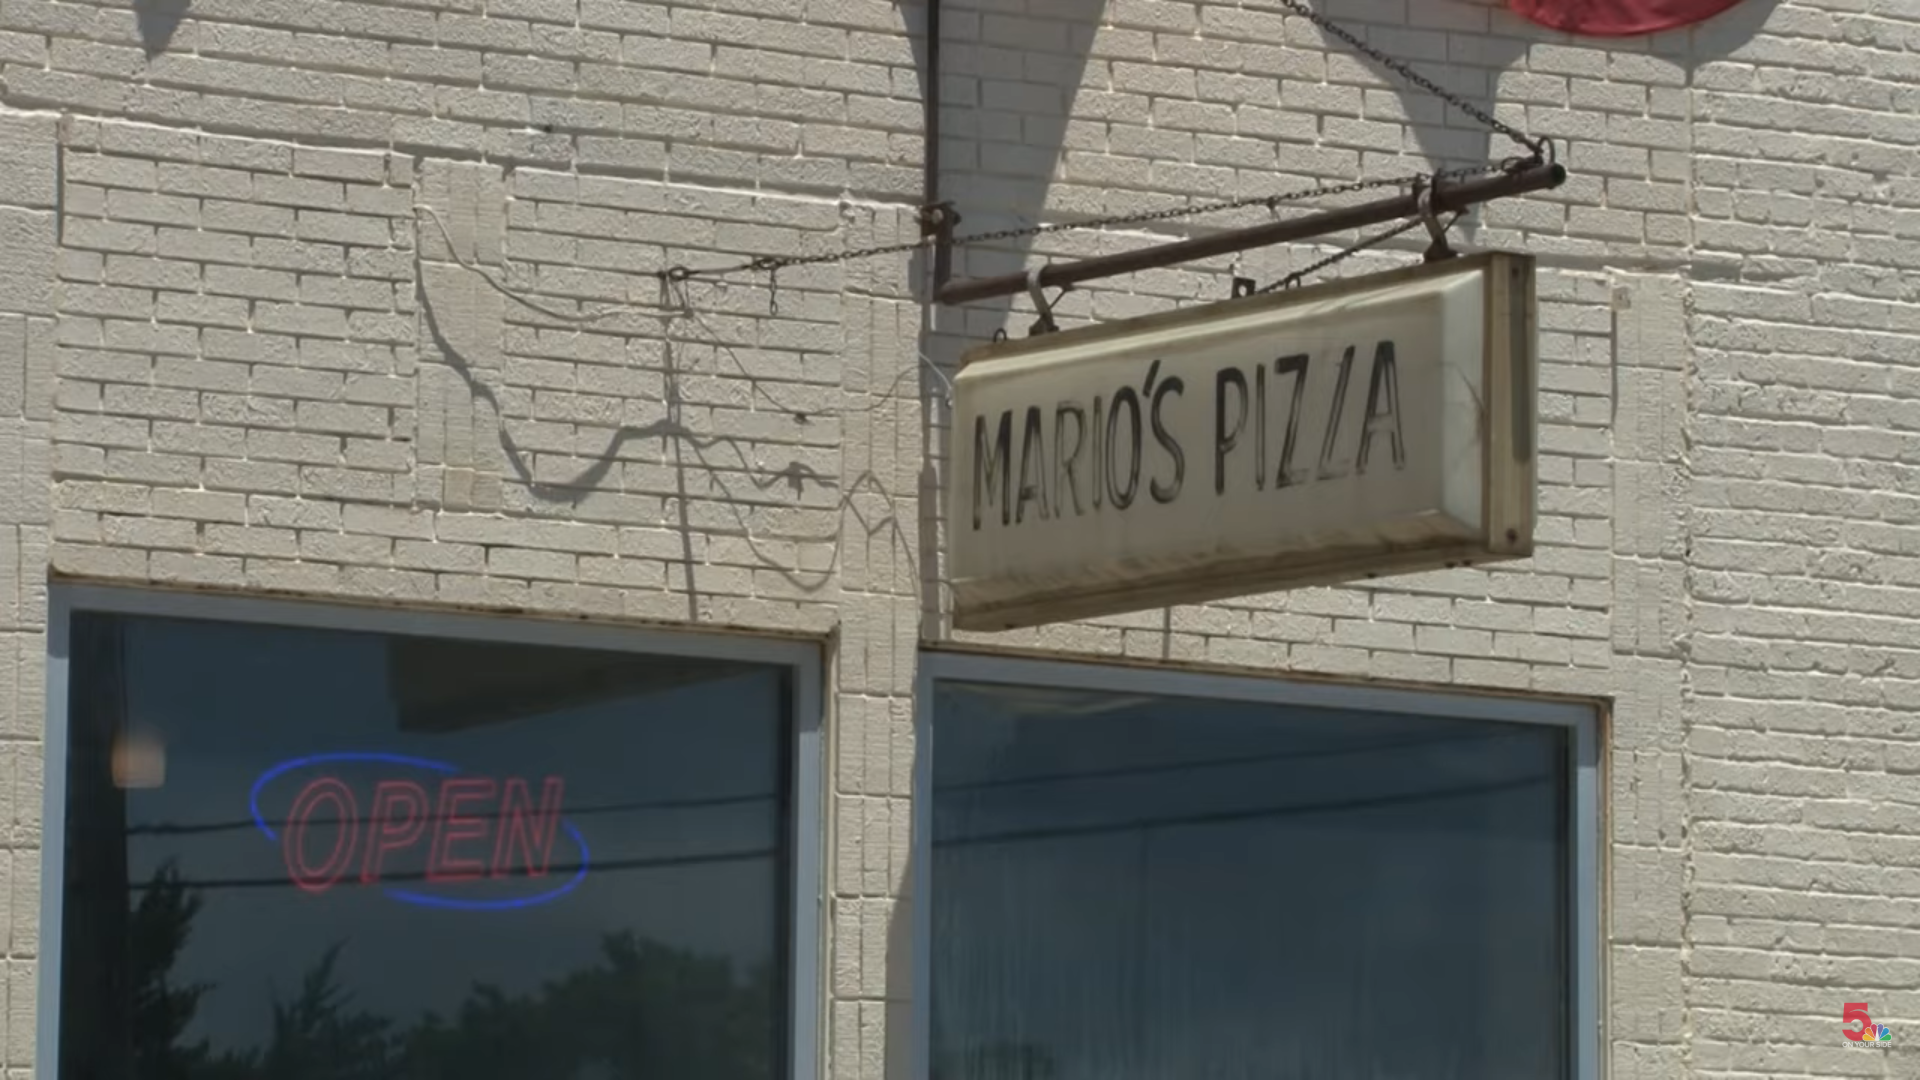 Frank Cusumano stopped by Mario's Pizza in Greenville, Illinois.